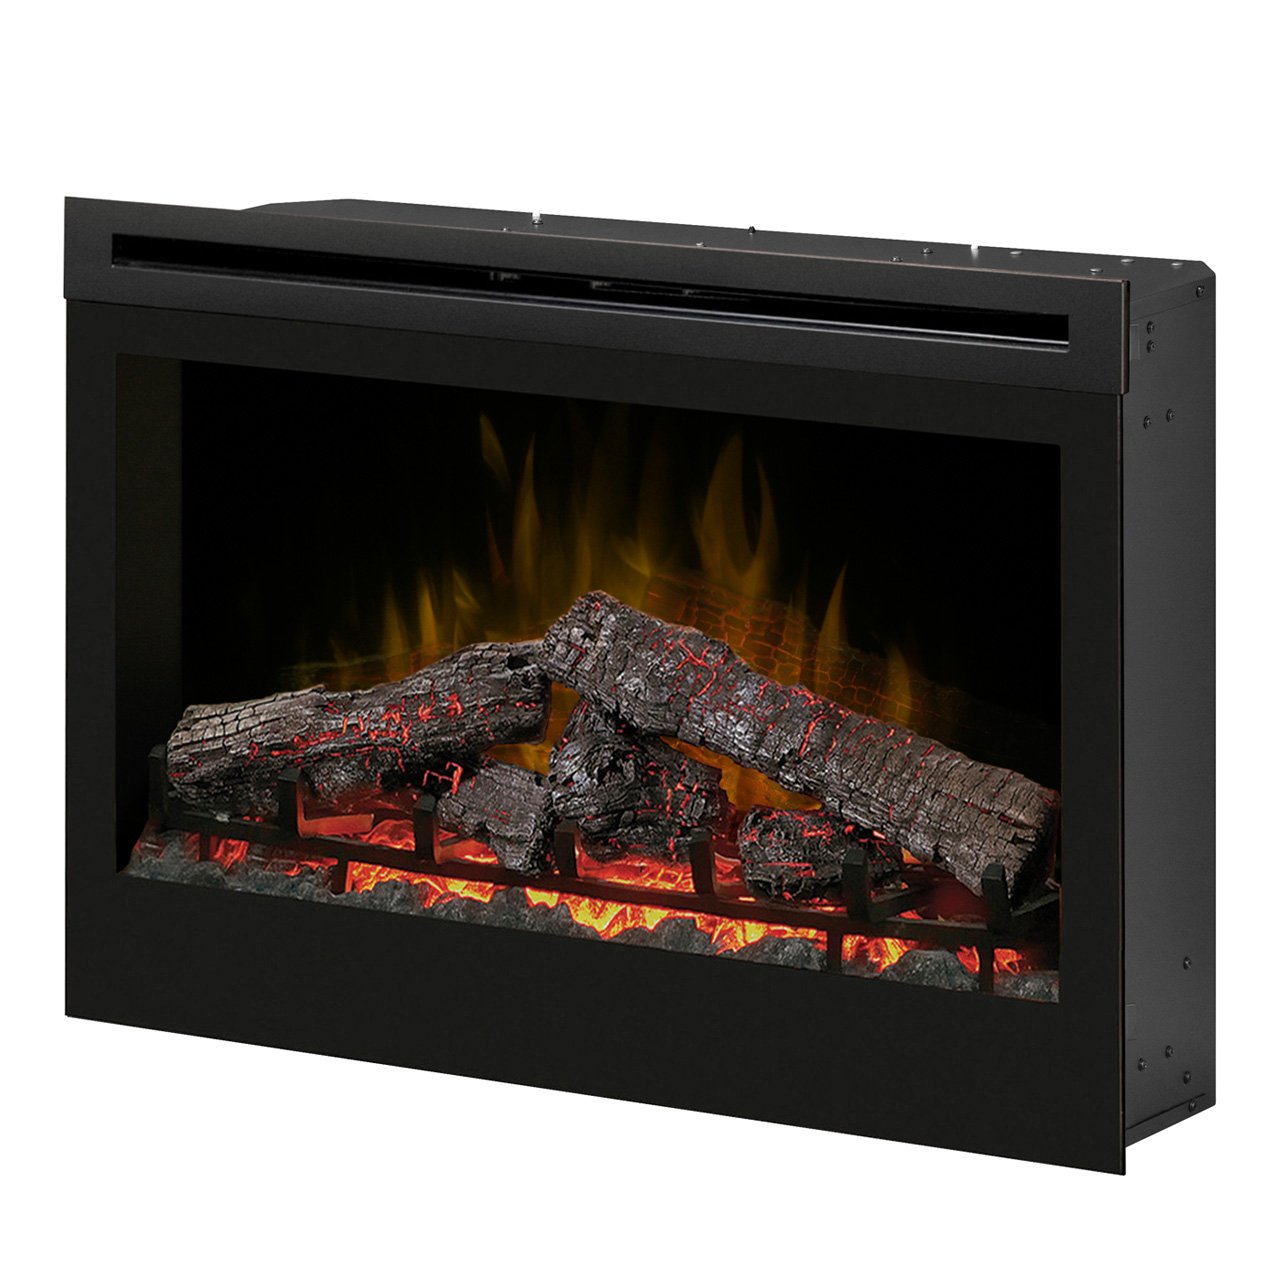 Wall Fireplace Heater Luxury Dimplex Df3033st 33 Inch Self Trimming Electric Fireplace Insert